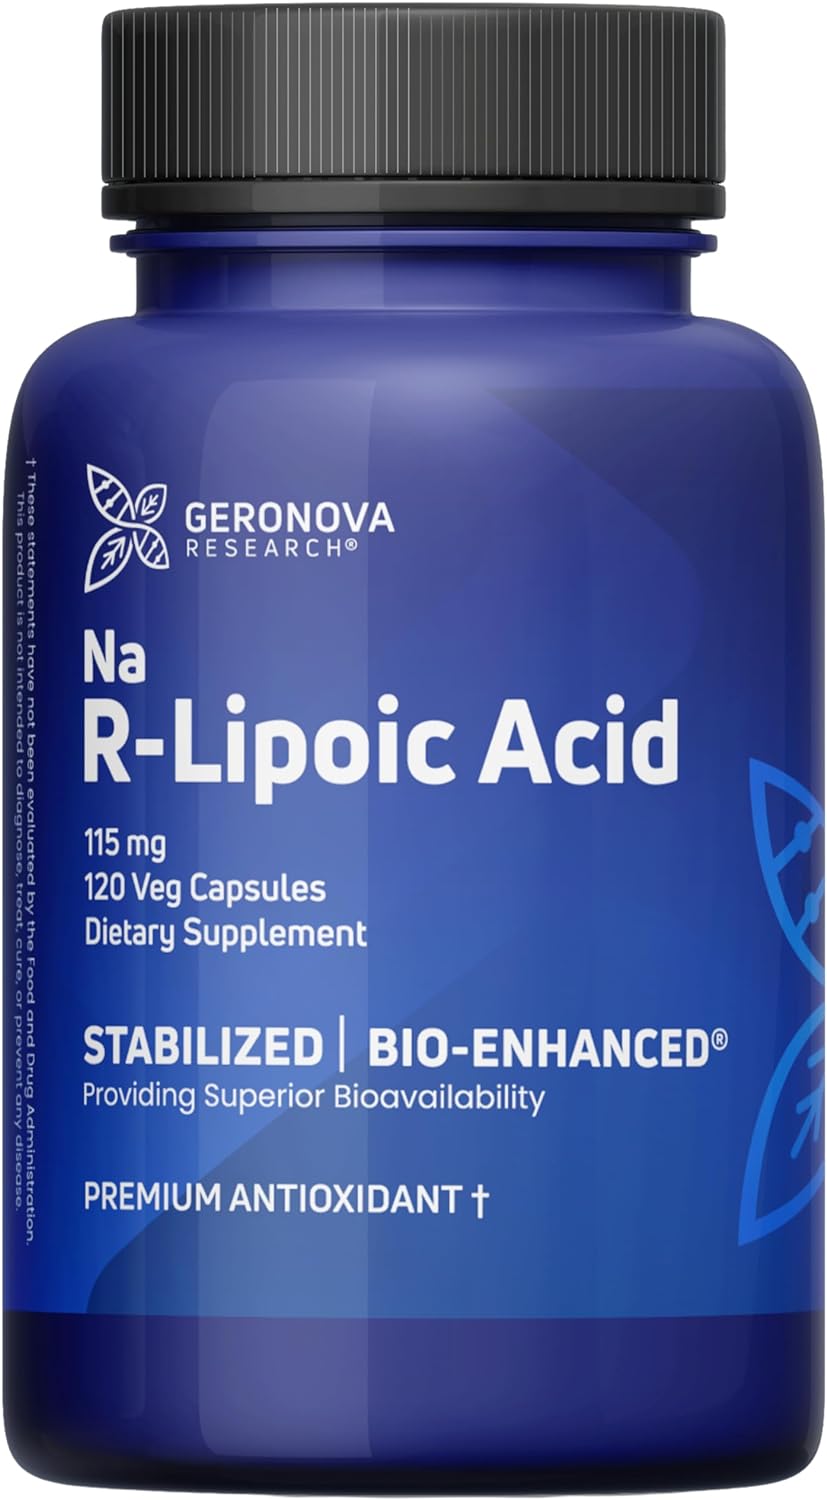 GeroNova Research R-Lipoic Acid 115mg 120 Caps - Stabilized R-Alpha Lipoic Acid With Superior Bioavailability, Metabolic Activity & Healthy Aging Support - Gluten Free & Non-GMO Antioxidant Supplement